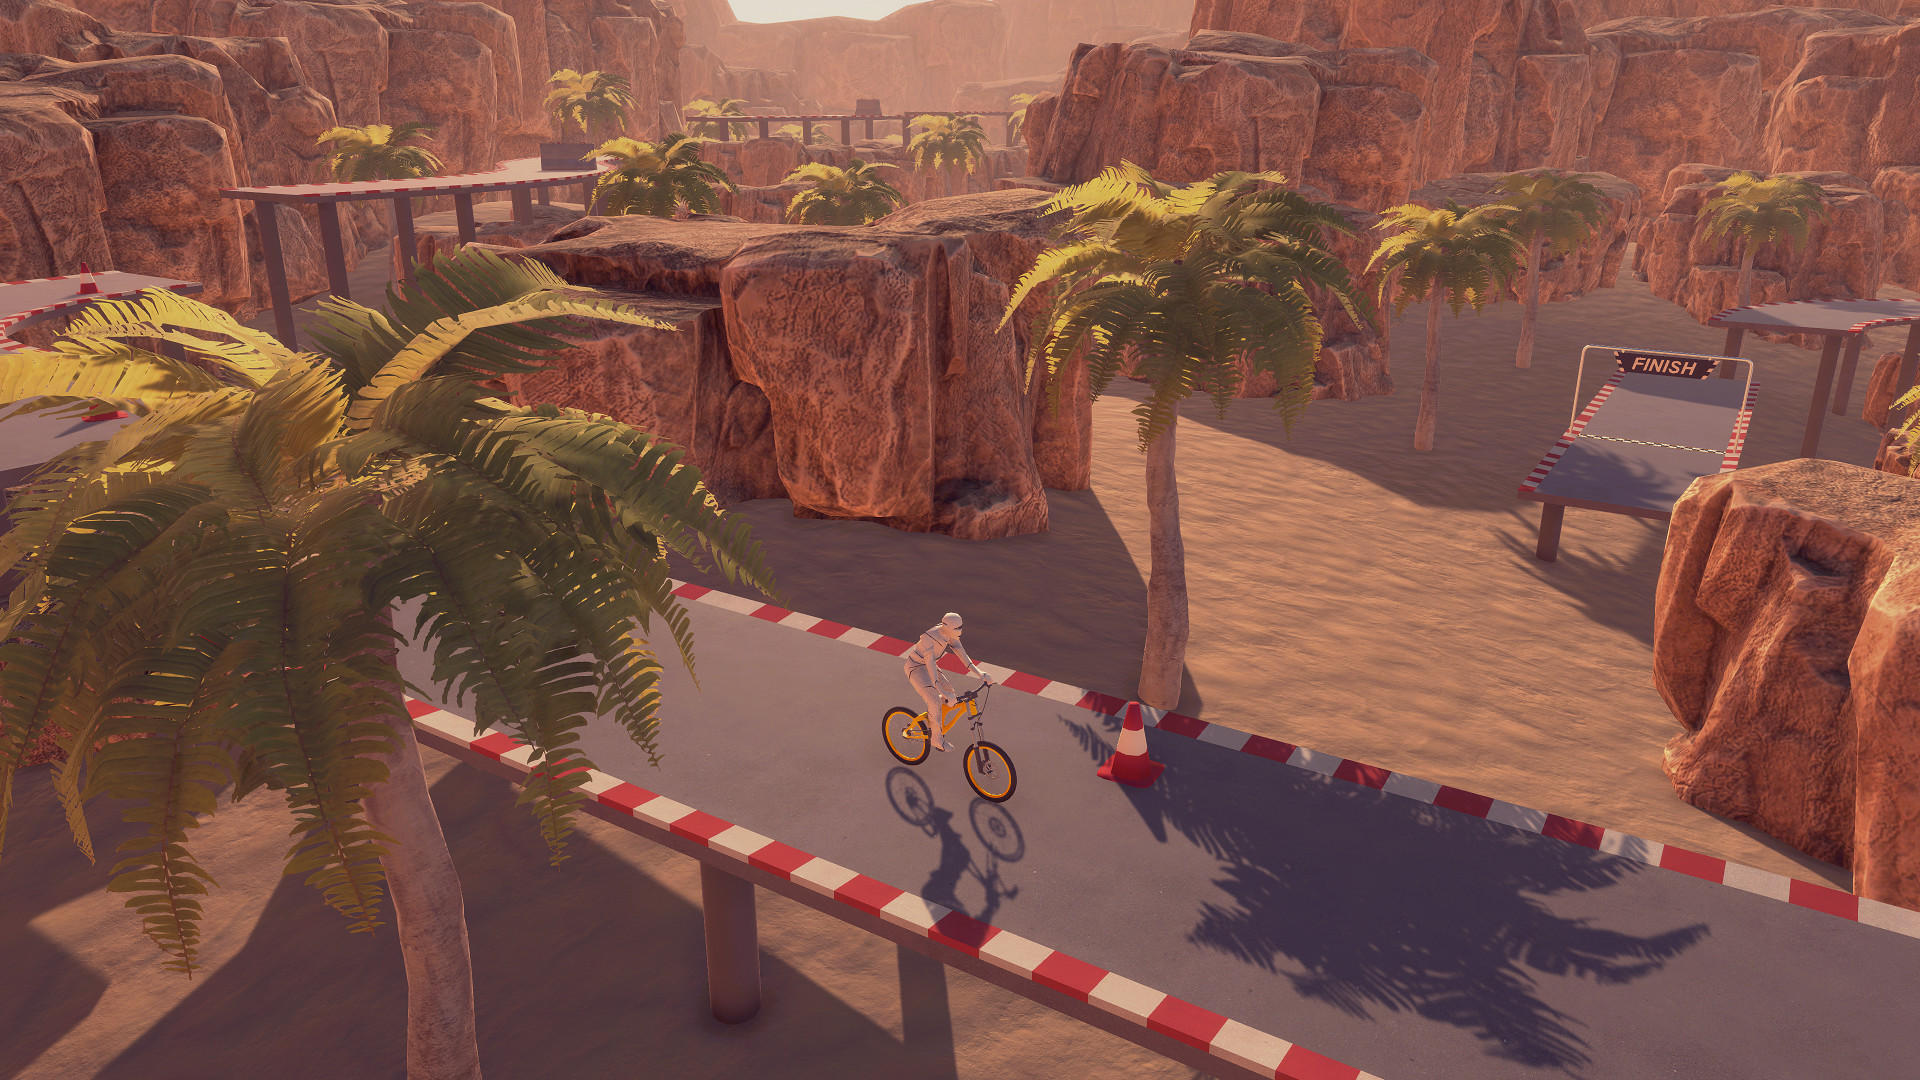 Watch Your Ride - Bicycle Game Free Download